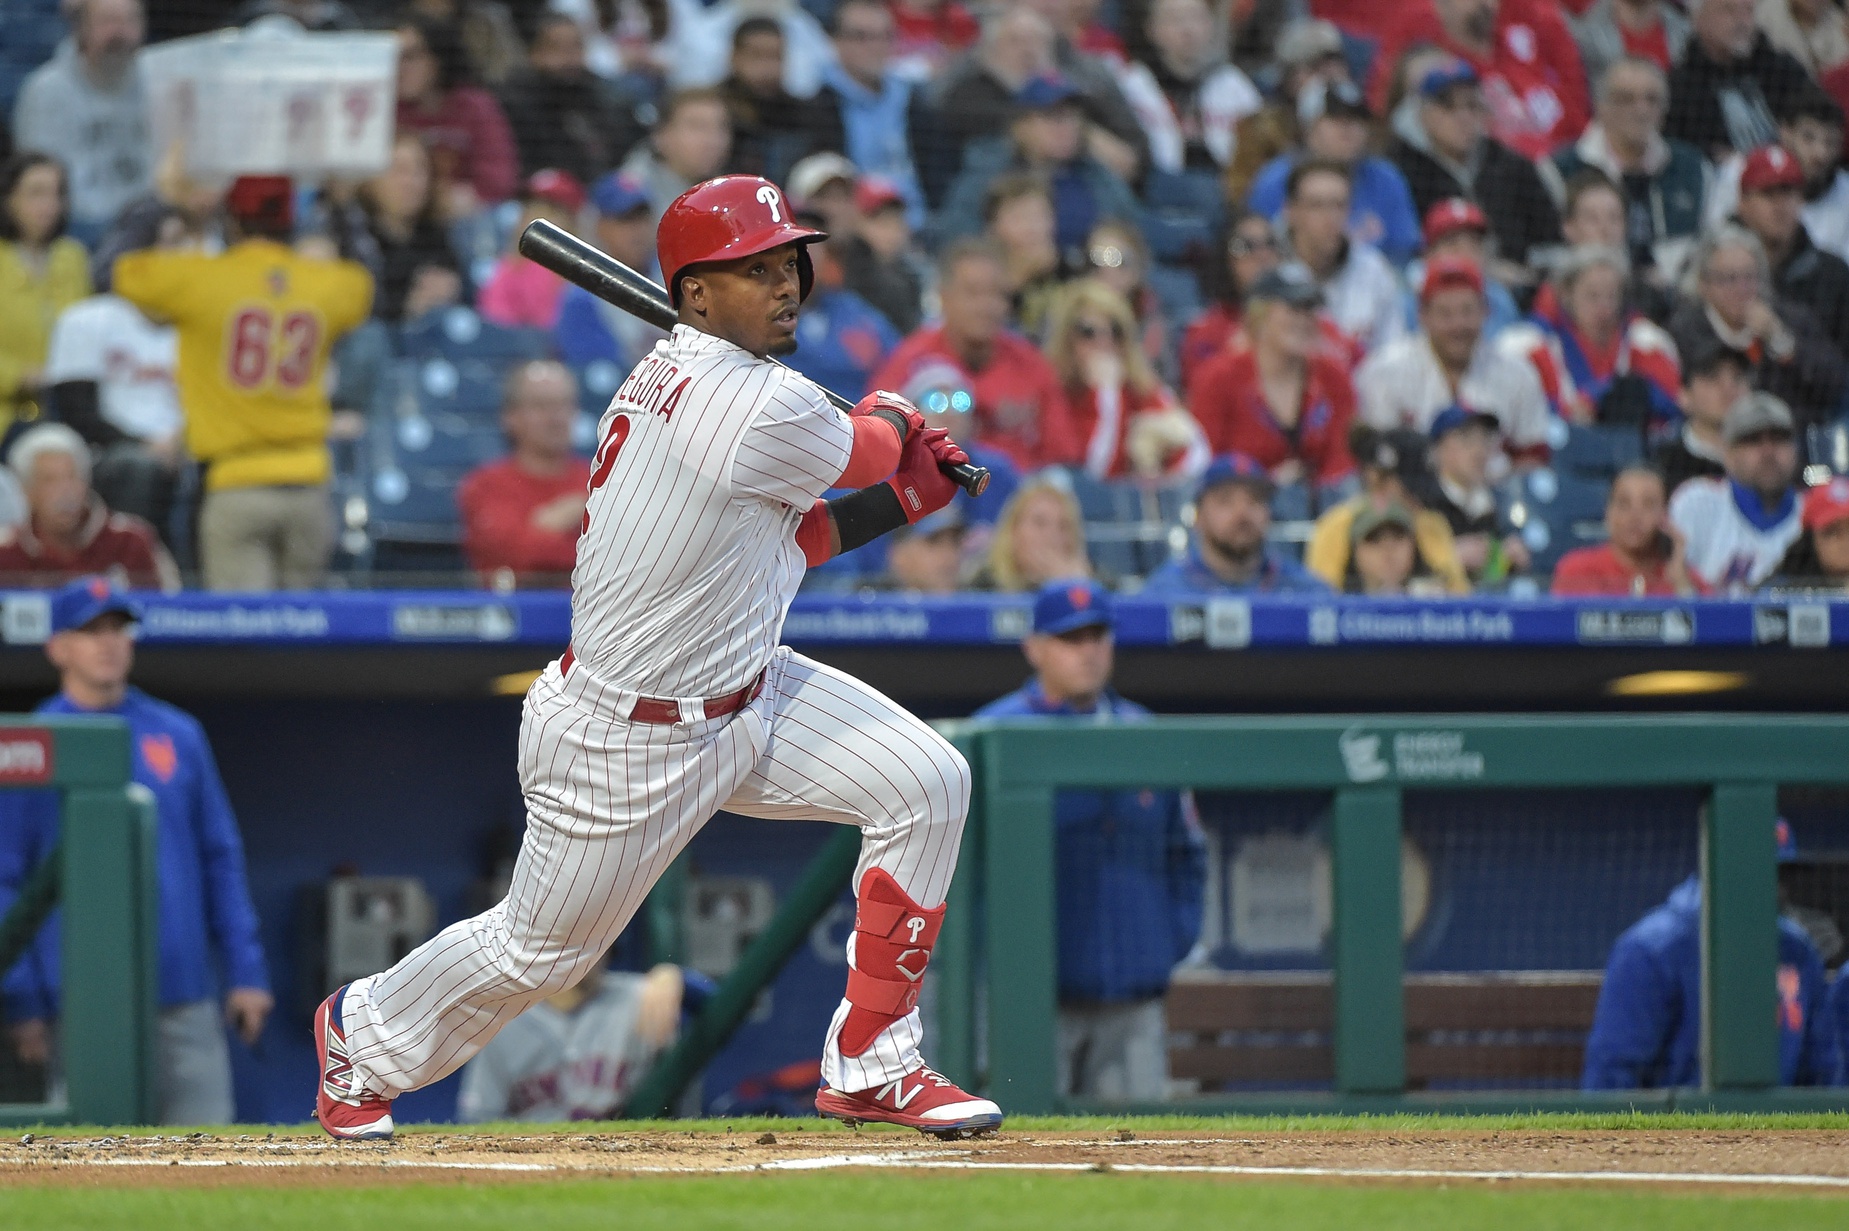 Phillies Shortstop Jean Segura Could Return to Action Tomorrow